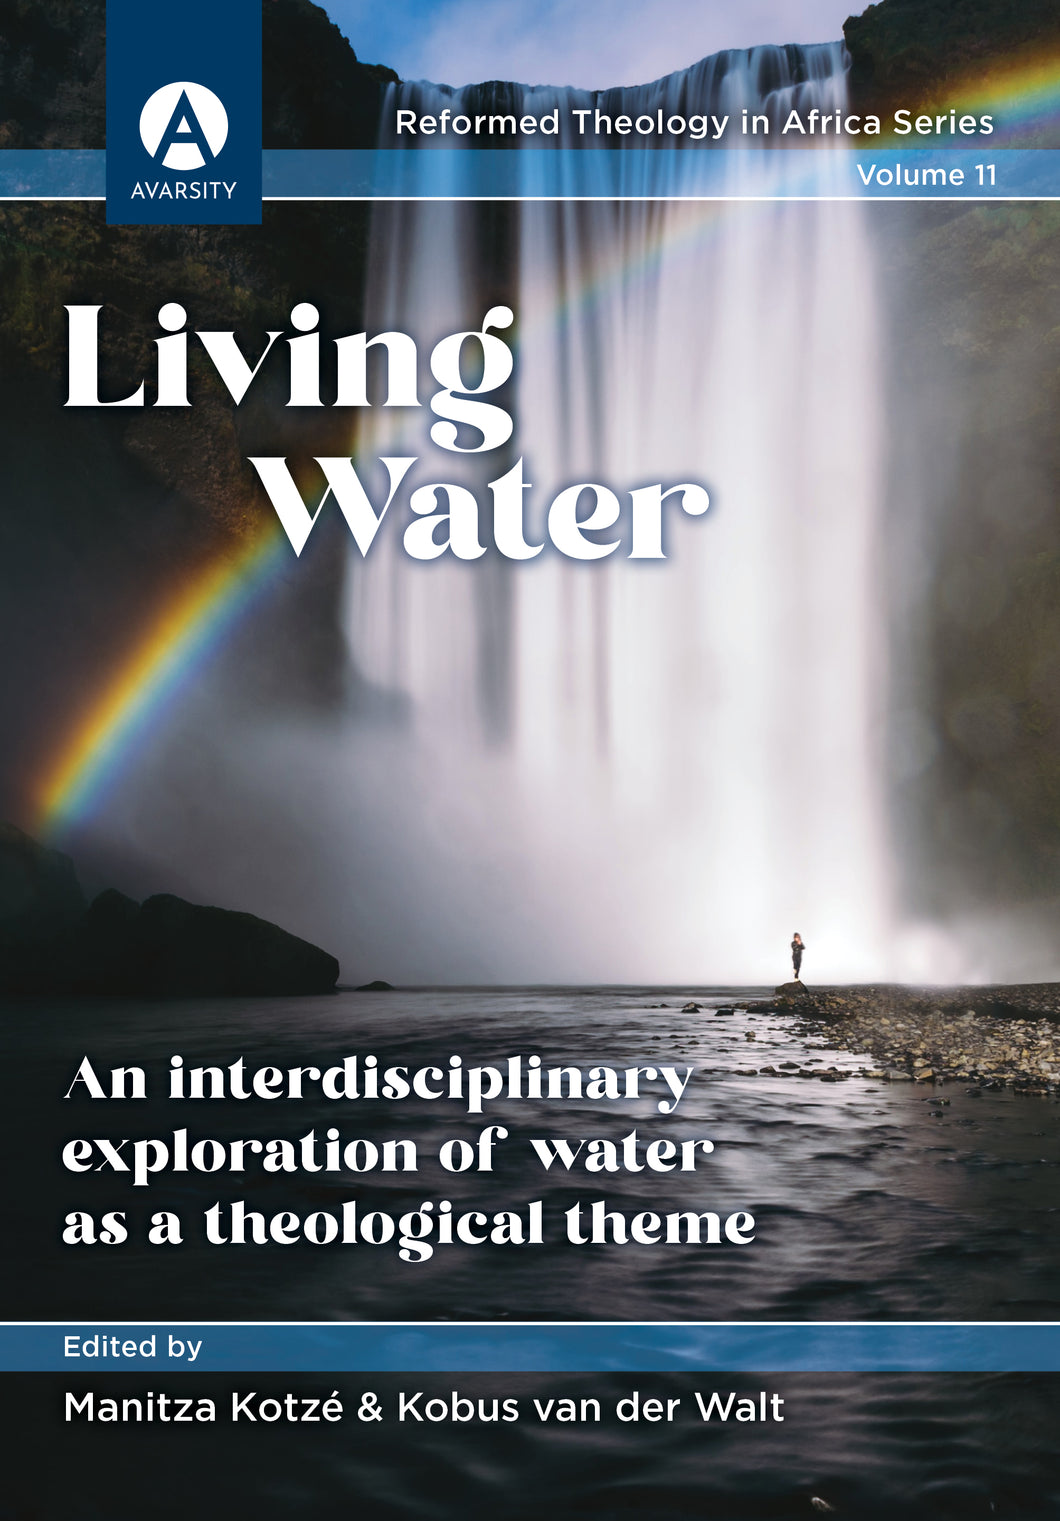 Living Water: An interdisciplinary exploration of water as a theological theme